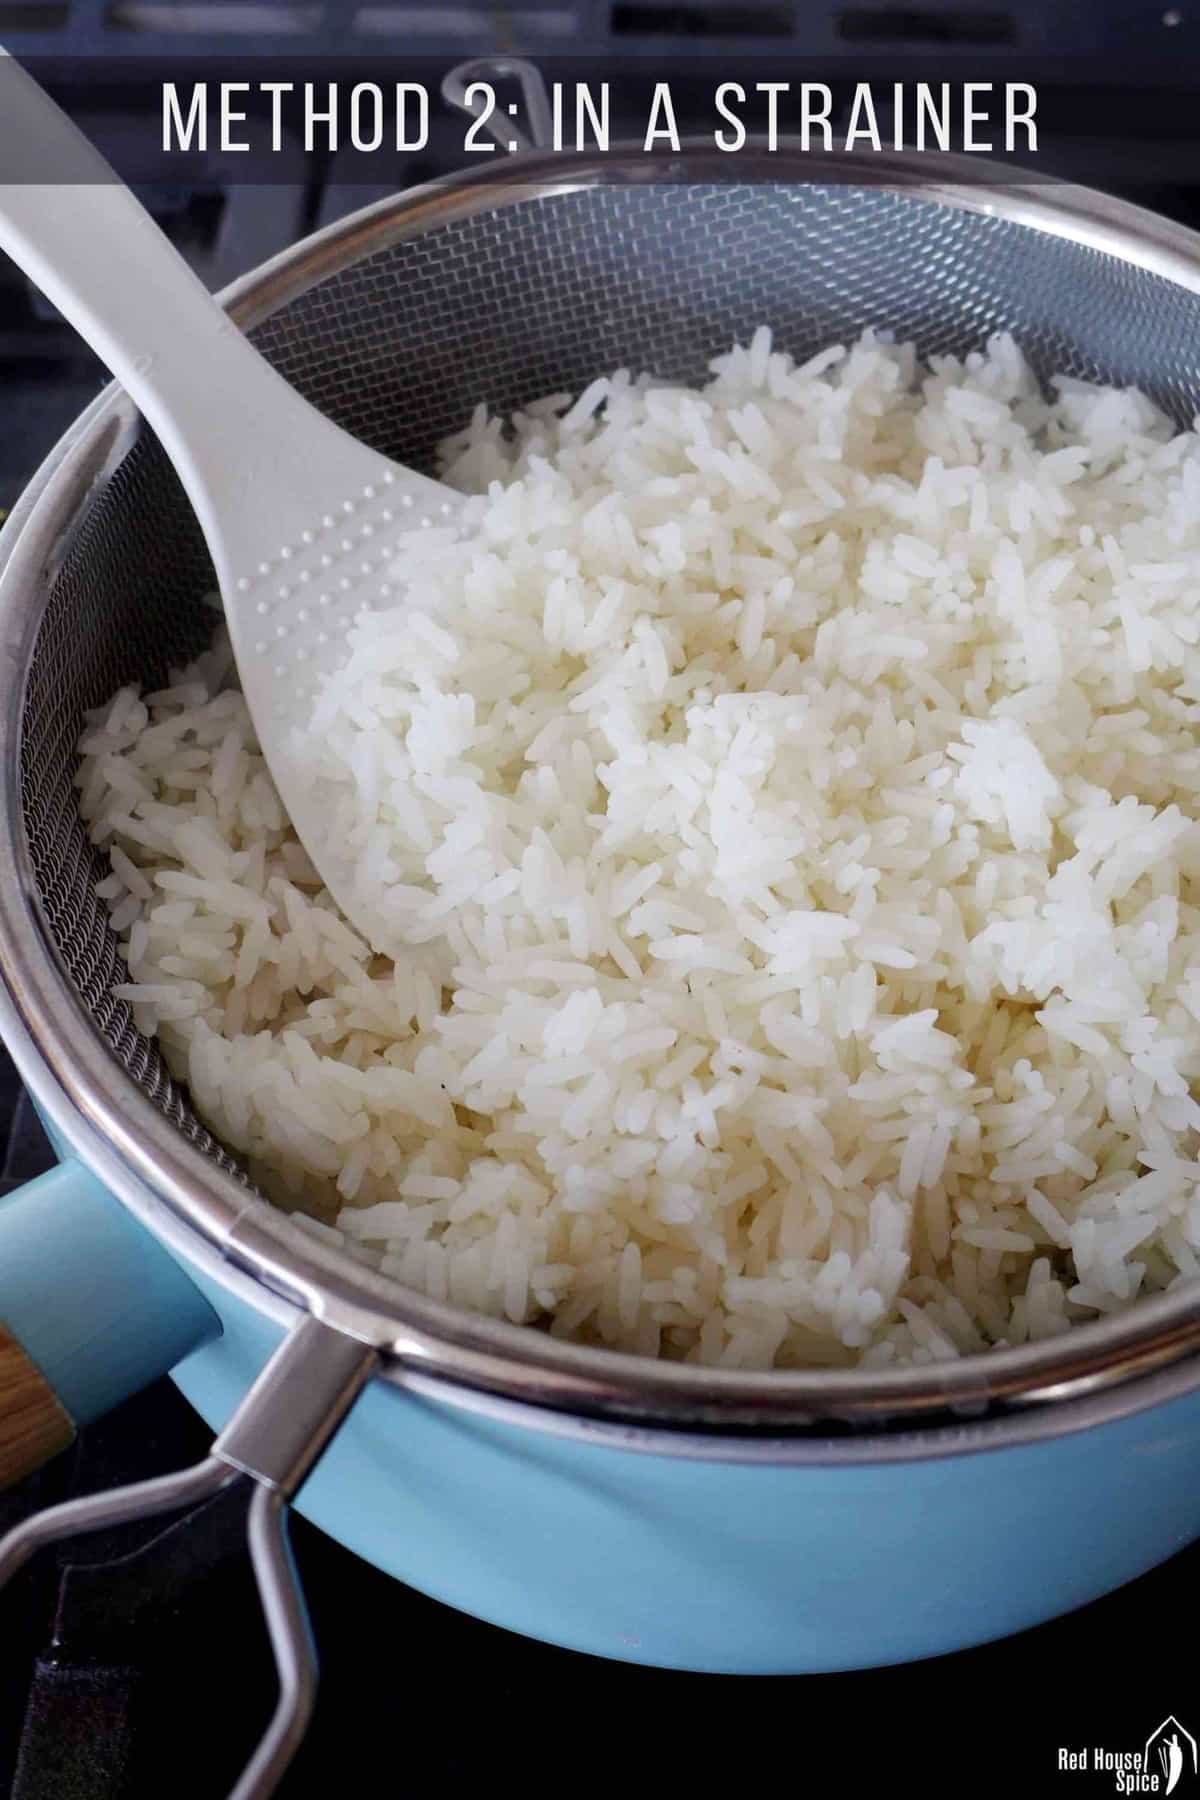 Cooked jasmine rice in a strainer over a saucepan.